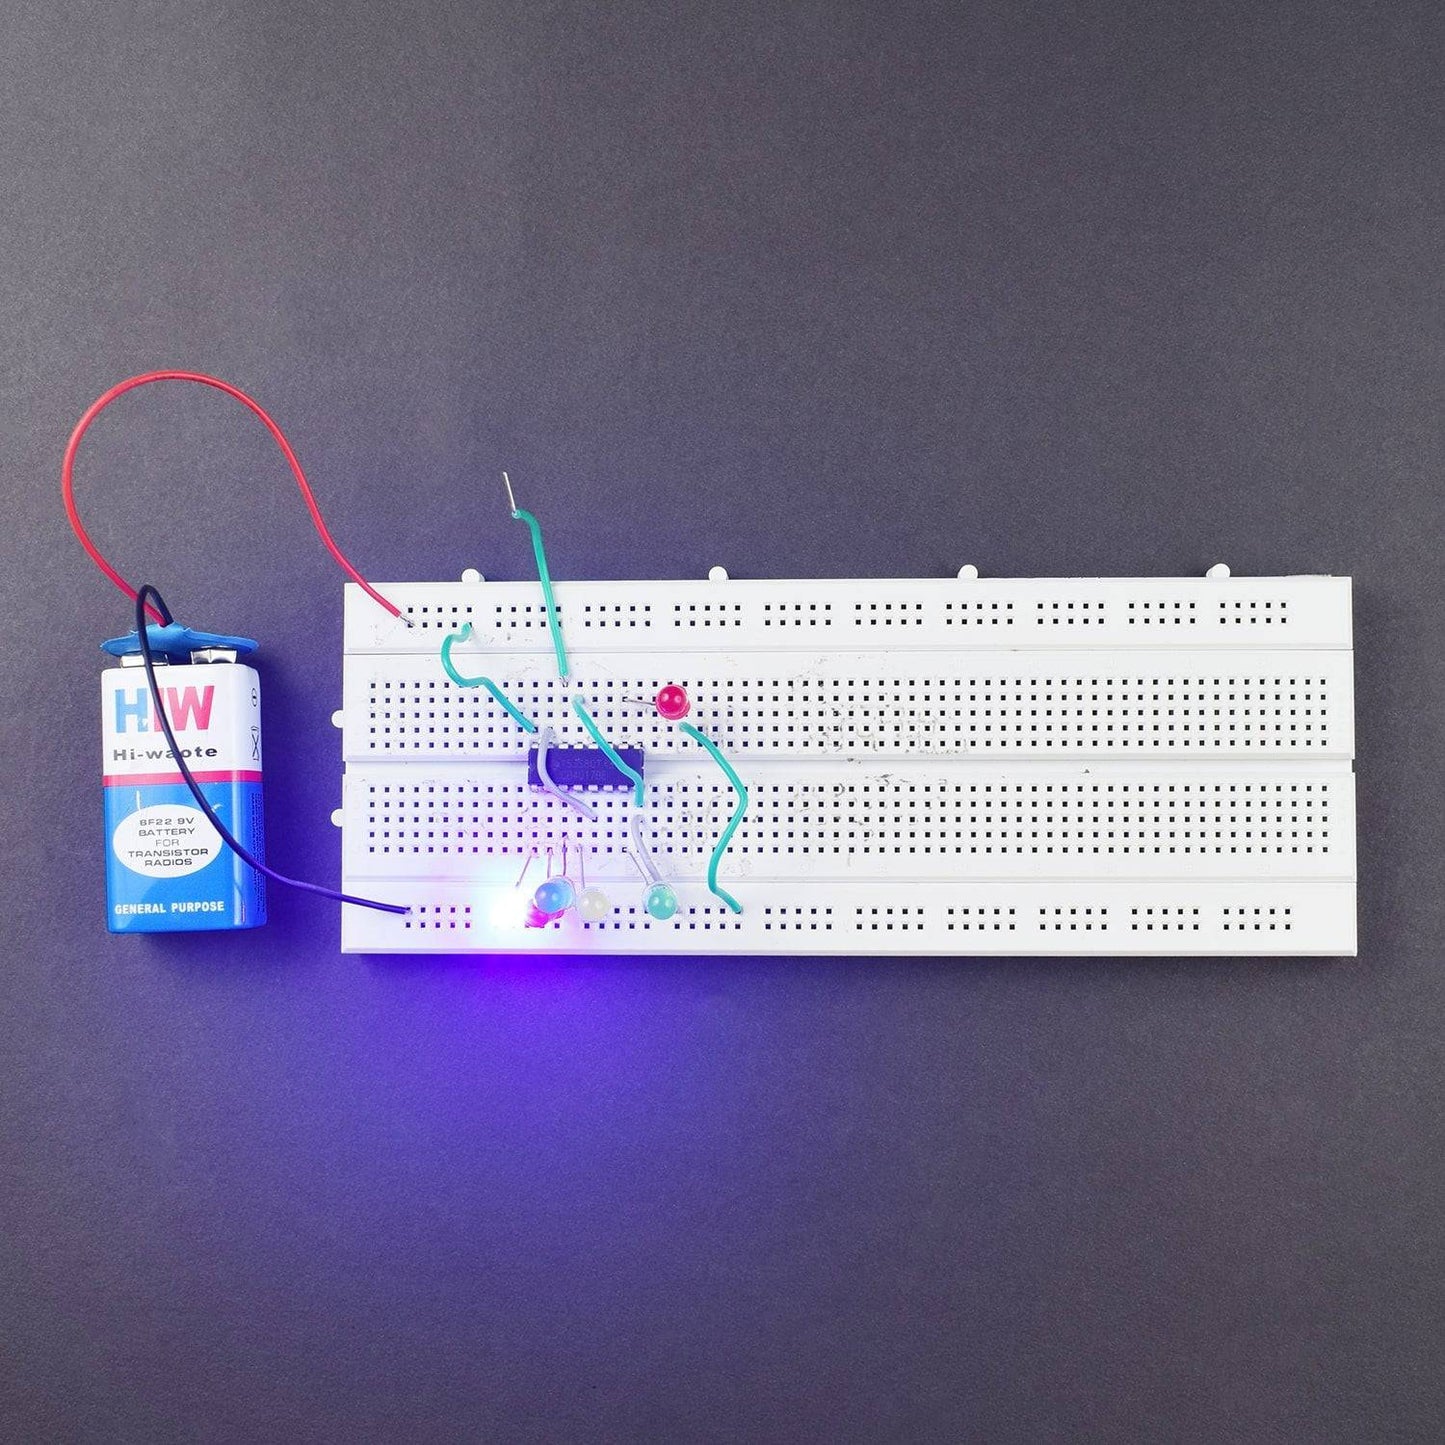 Make an Electronic dice using 4017 IC - KT966 - REES52